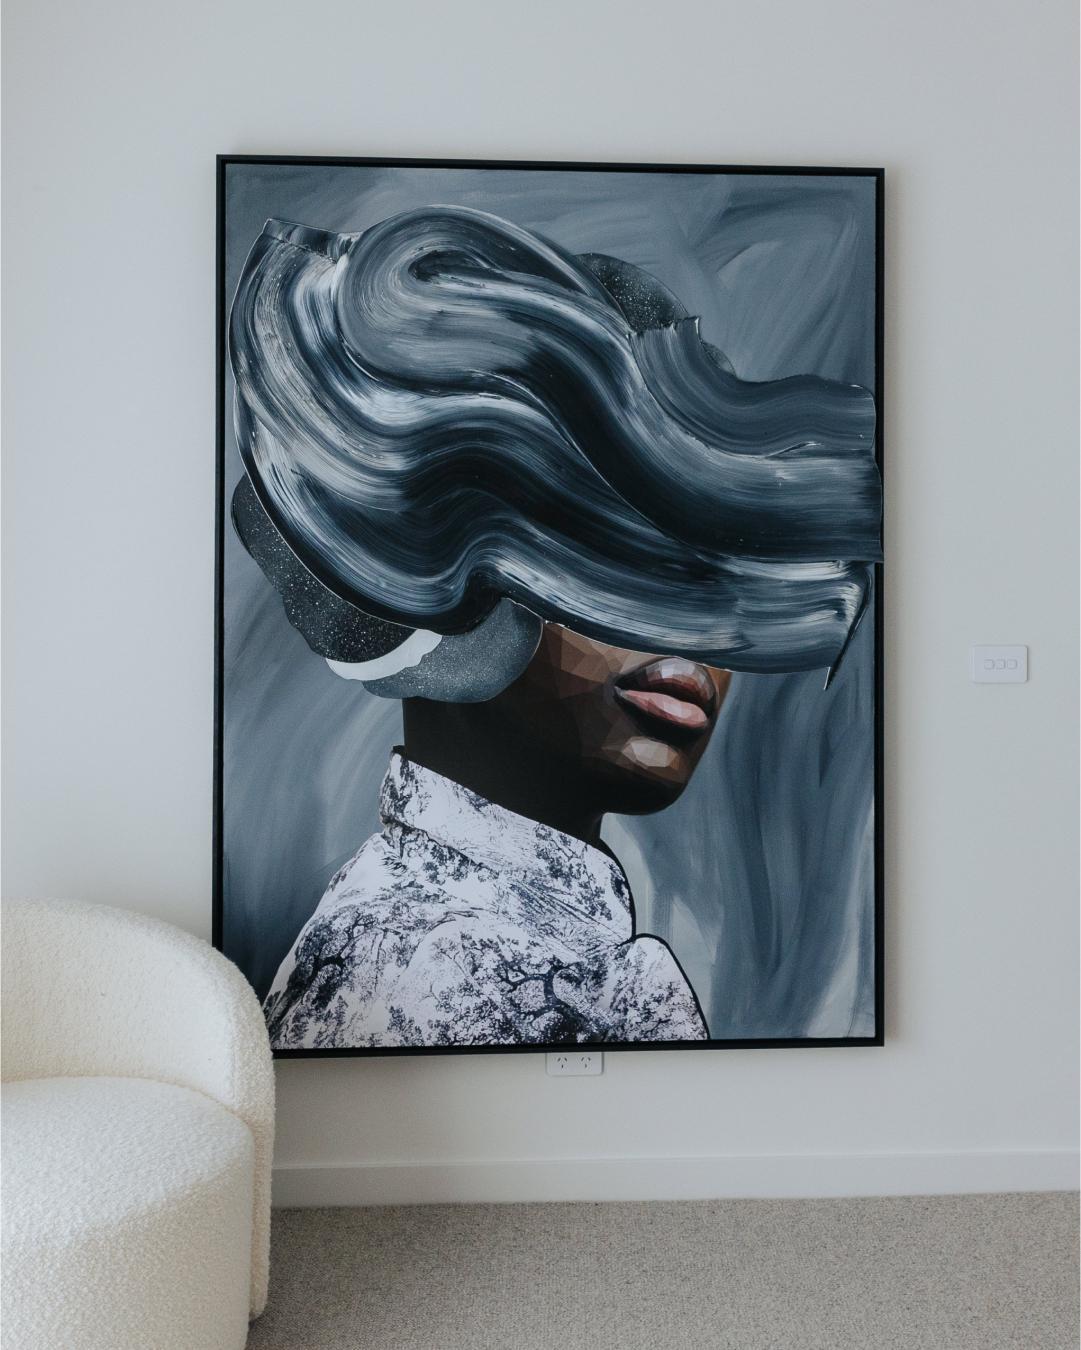 An art piece showcasing a woman' evokes a sense of mystery…A cool, edgy piece that sits beautifully in the master bedroom of The Elba.